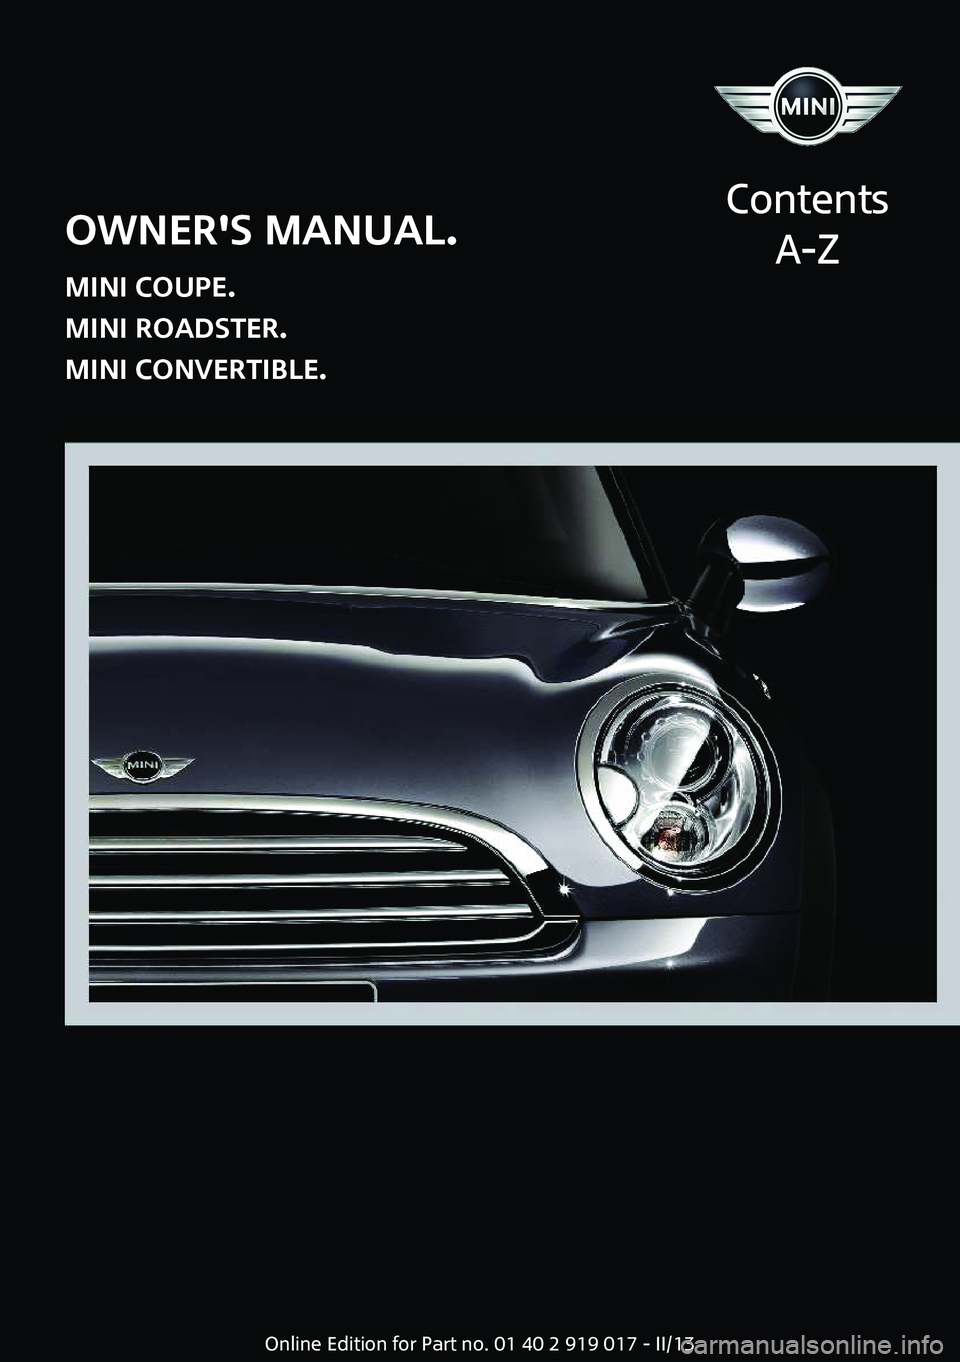 MINI COOPER CONVERTIBLE 2013  Owners Manual Owner's Manual.
MINI Coupe.
MINI Roadster.
MINI Convertible.
Contents
A-ZOnline Edition for Part no. 01 40 2 919 017 - II/13  